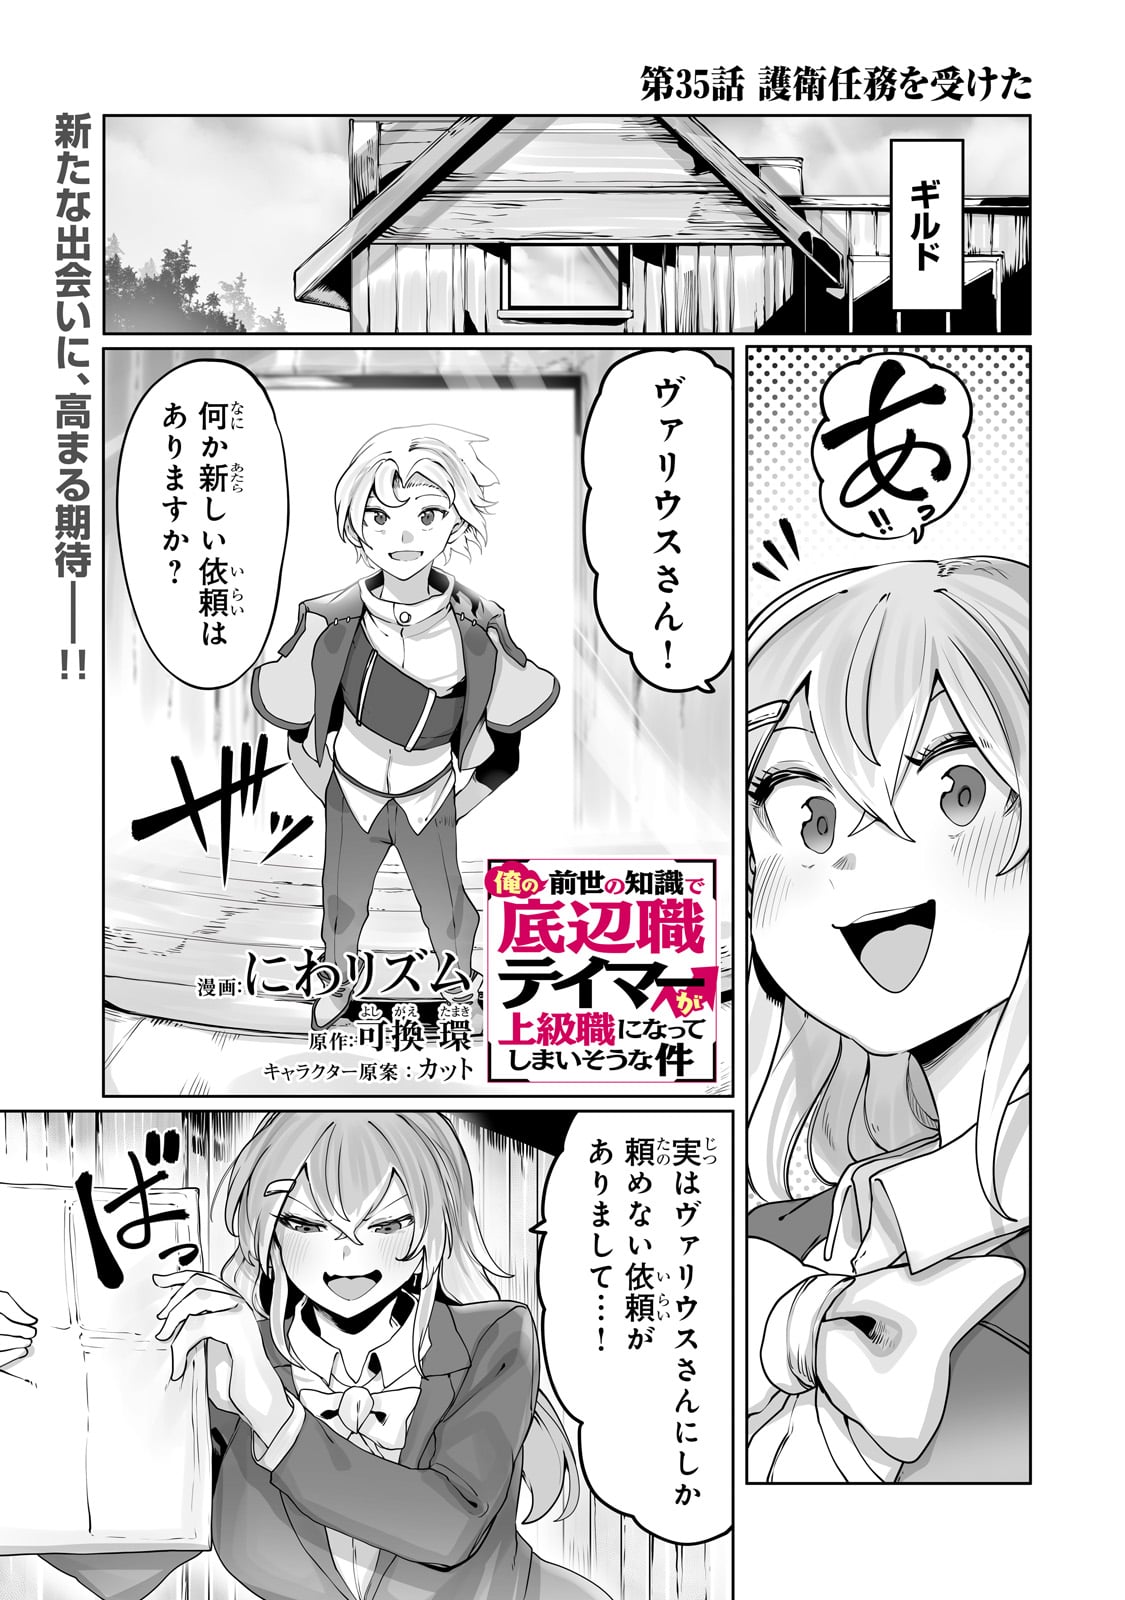 The Useless Tamer Will Turn Into the Top Unconsciously by My Previous Life Knowledge - Chapter 35 - Page 1